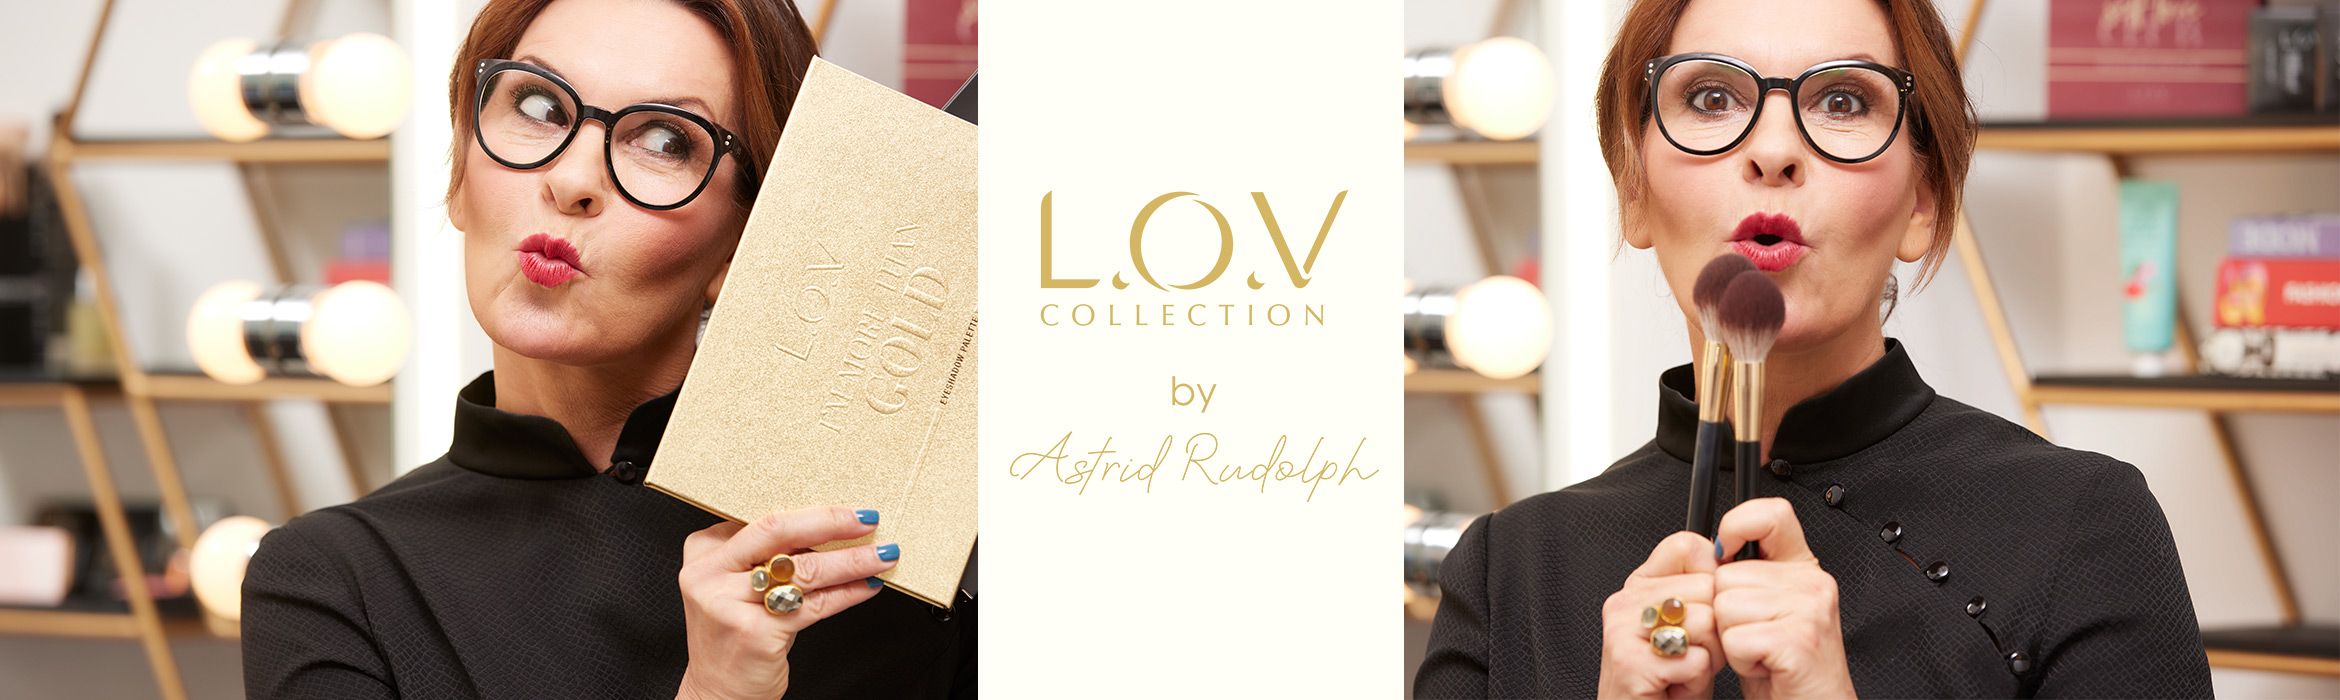 L.O.V COLLECTION by Astrid Rudolph 